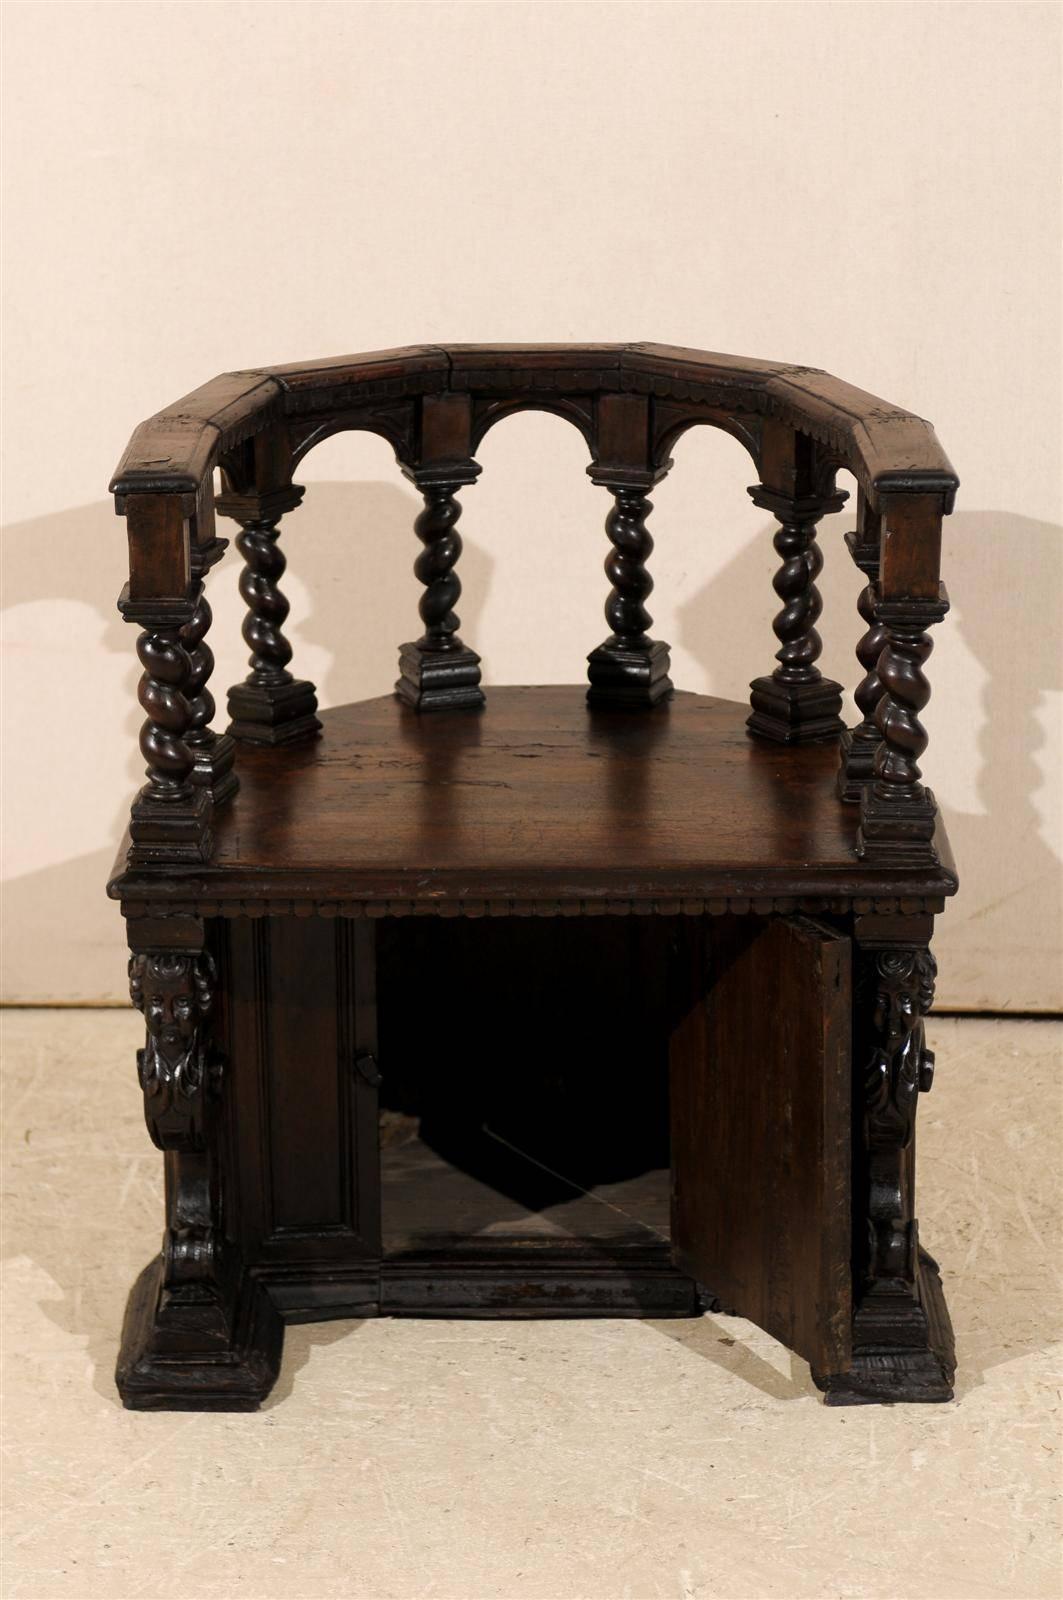 An exquisite 18th century Italian wooden carved round about chair with secret door at the bottom. Barley twist posts support the arched top rail while the lower section of the chair is decorated with faces of chubby putti on volutes. Guarded by the